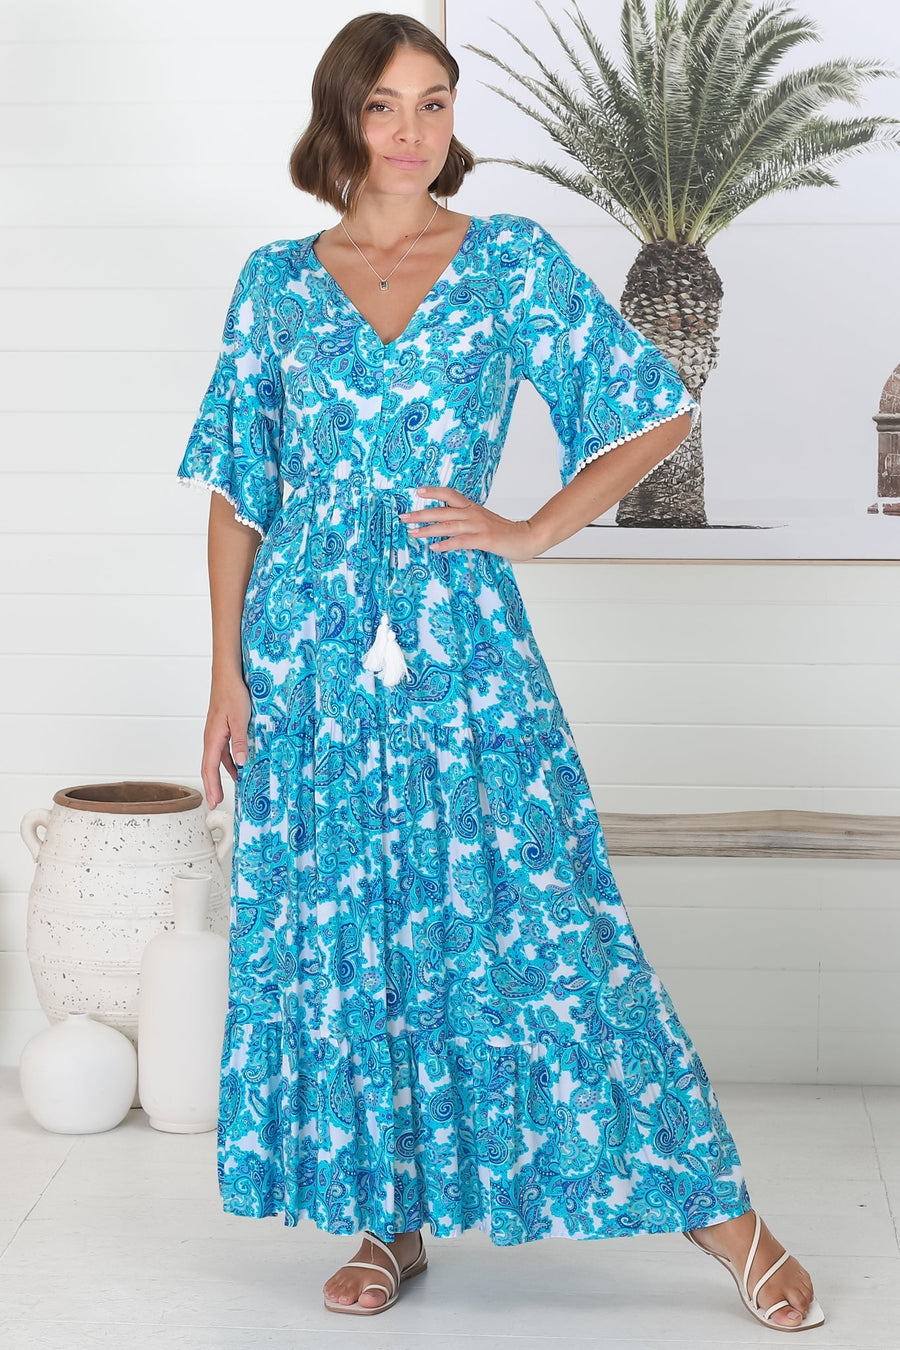 Shop the Romelly Maxi Dress in Blue at Salty Crush